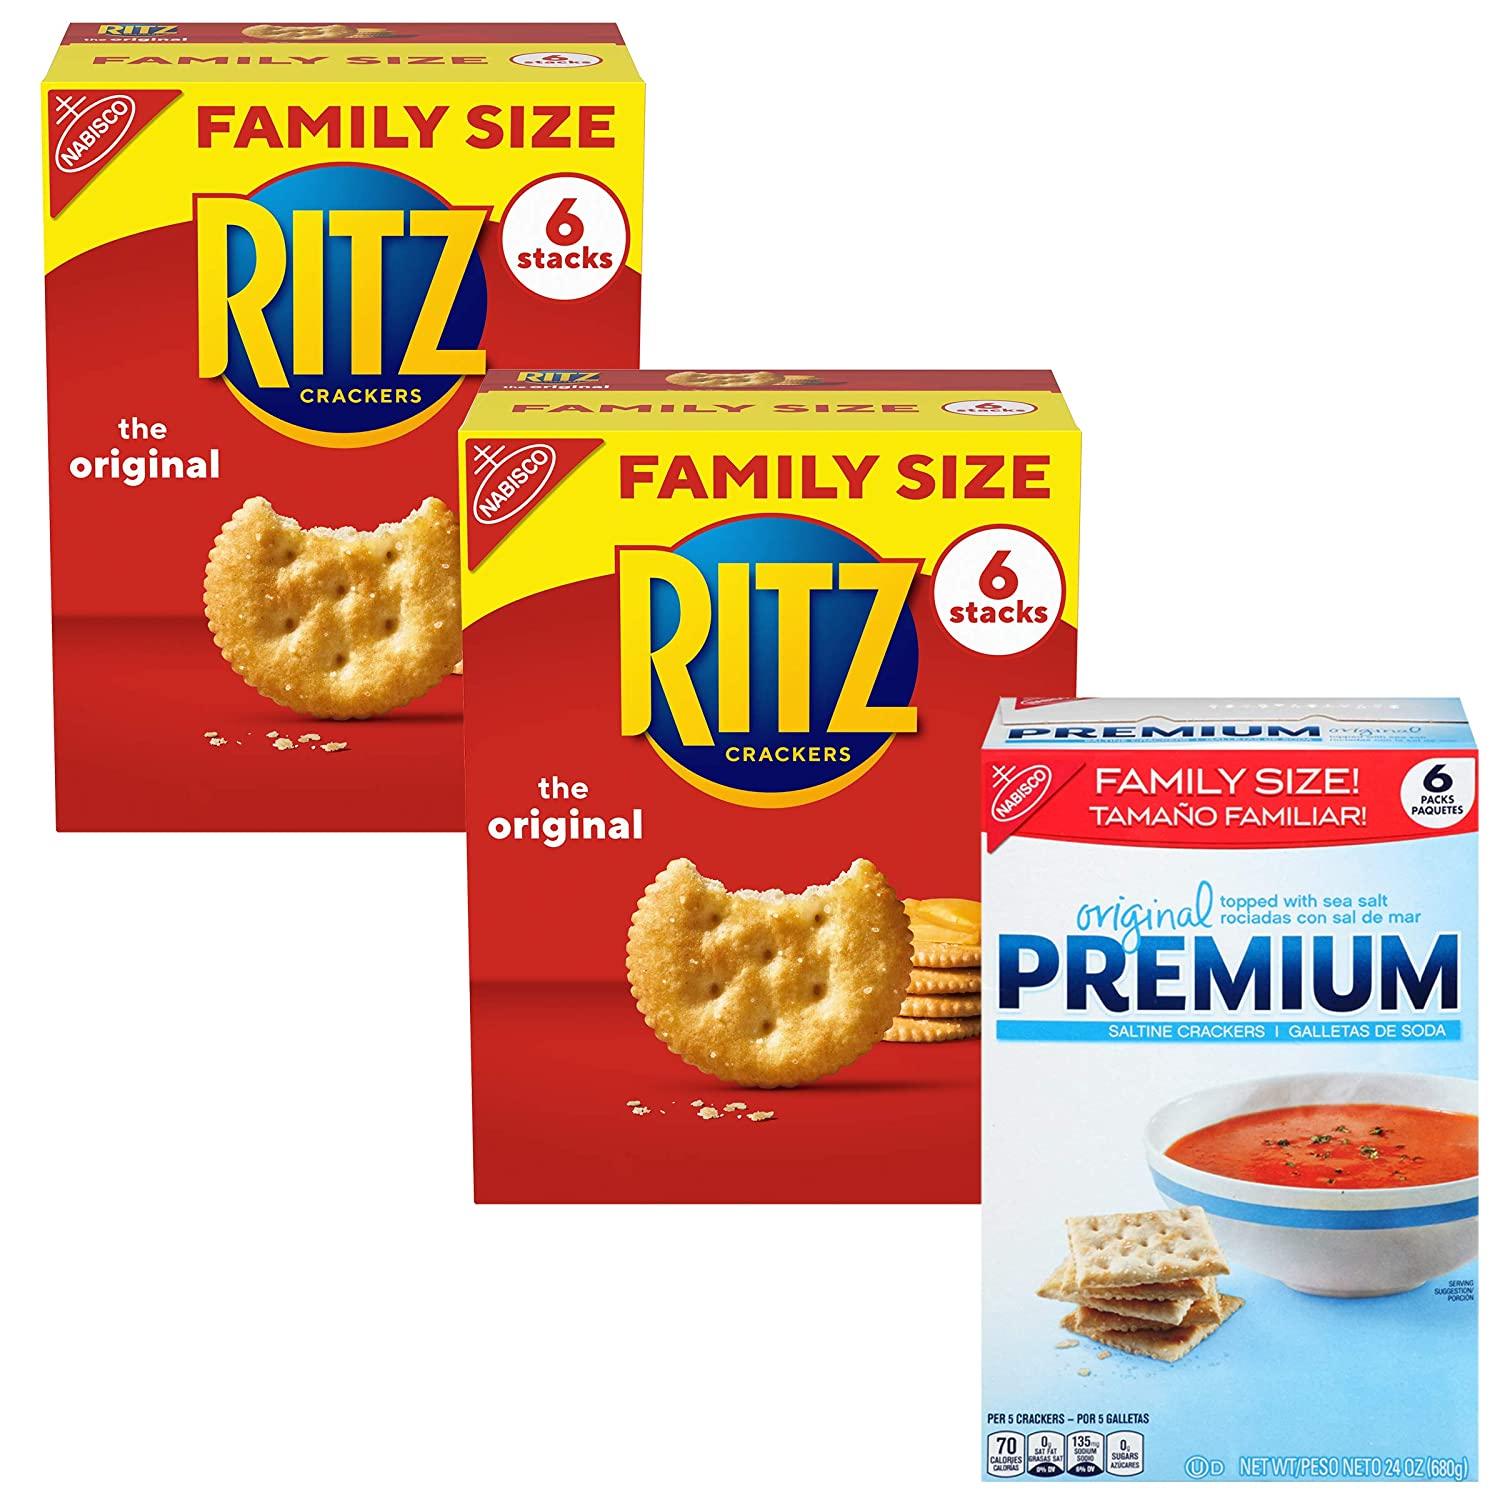 3 Family Size Ritz Crackers and Premium Saltine Crackers for $7.67 Shipped